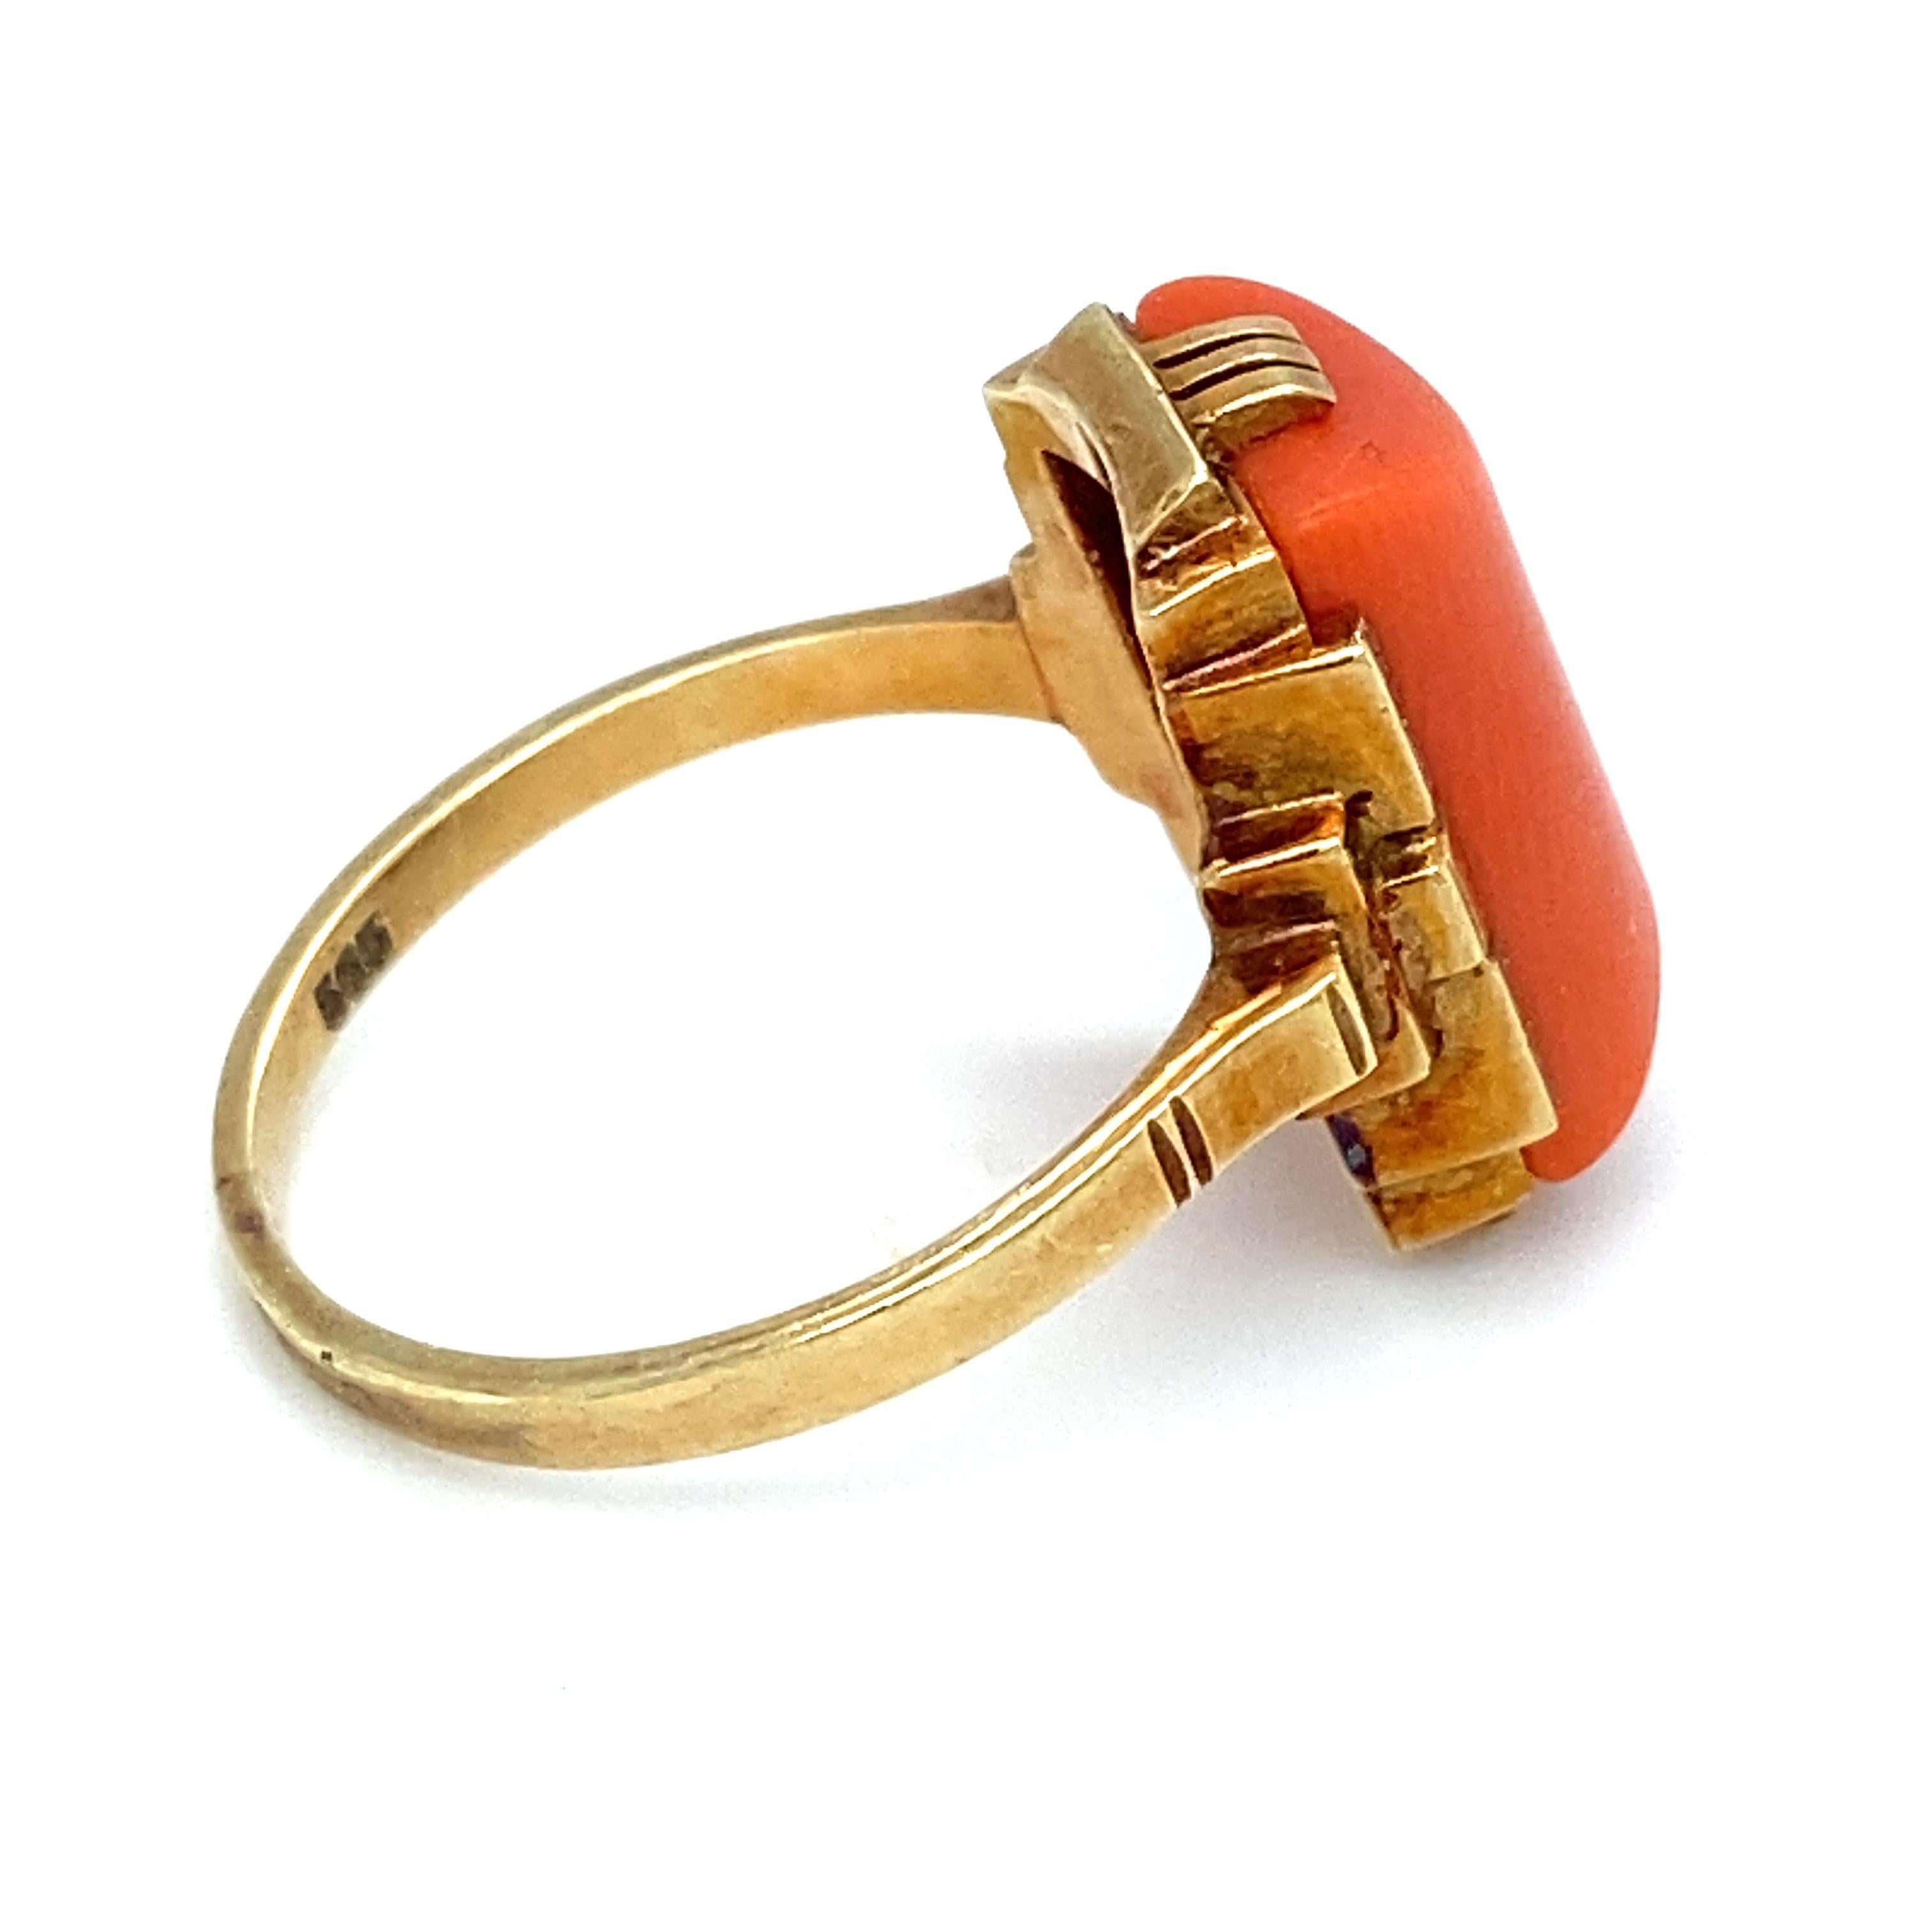 Circa 1940s Art Deco Style Rectangular Coral Ring in 14 Karat Yellow Gold For Sale 1